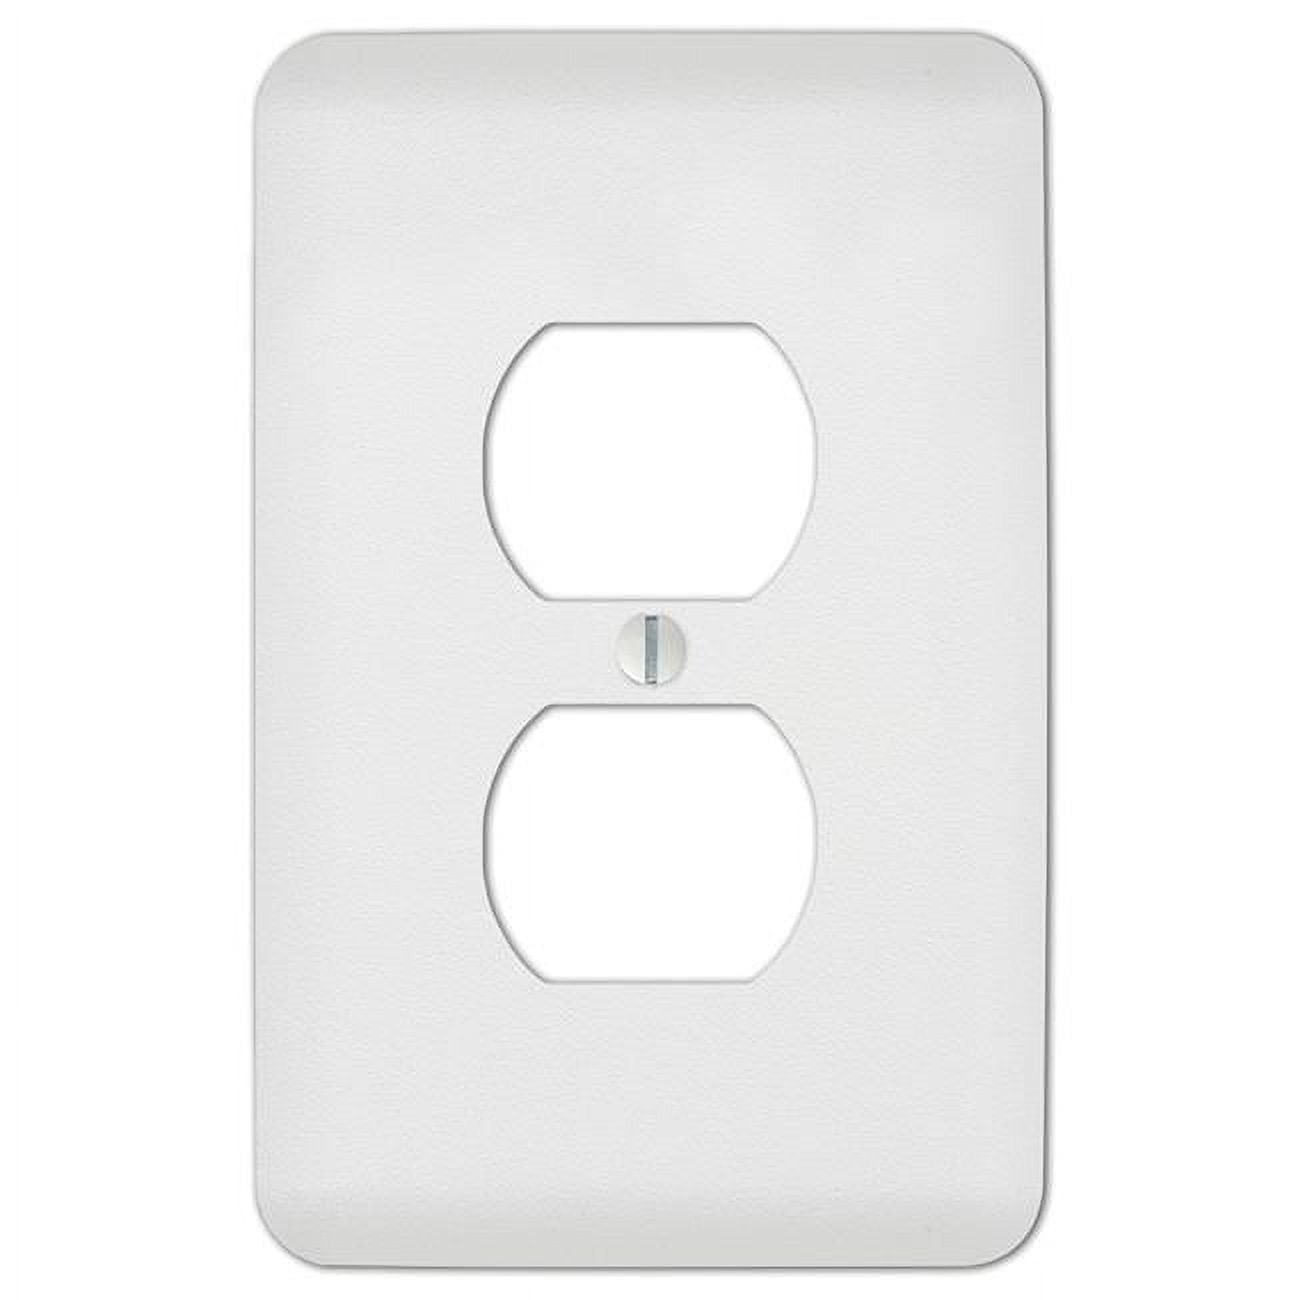 Picture of Amerelle 3009133 Perry Textured 1 Gang Stamped Steel Duplex Outlet Wall Plate, White - Pack of 4